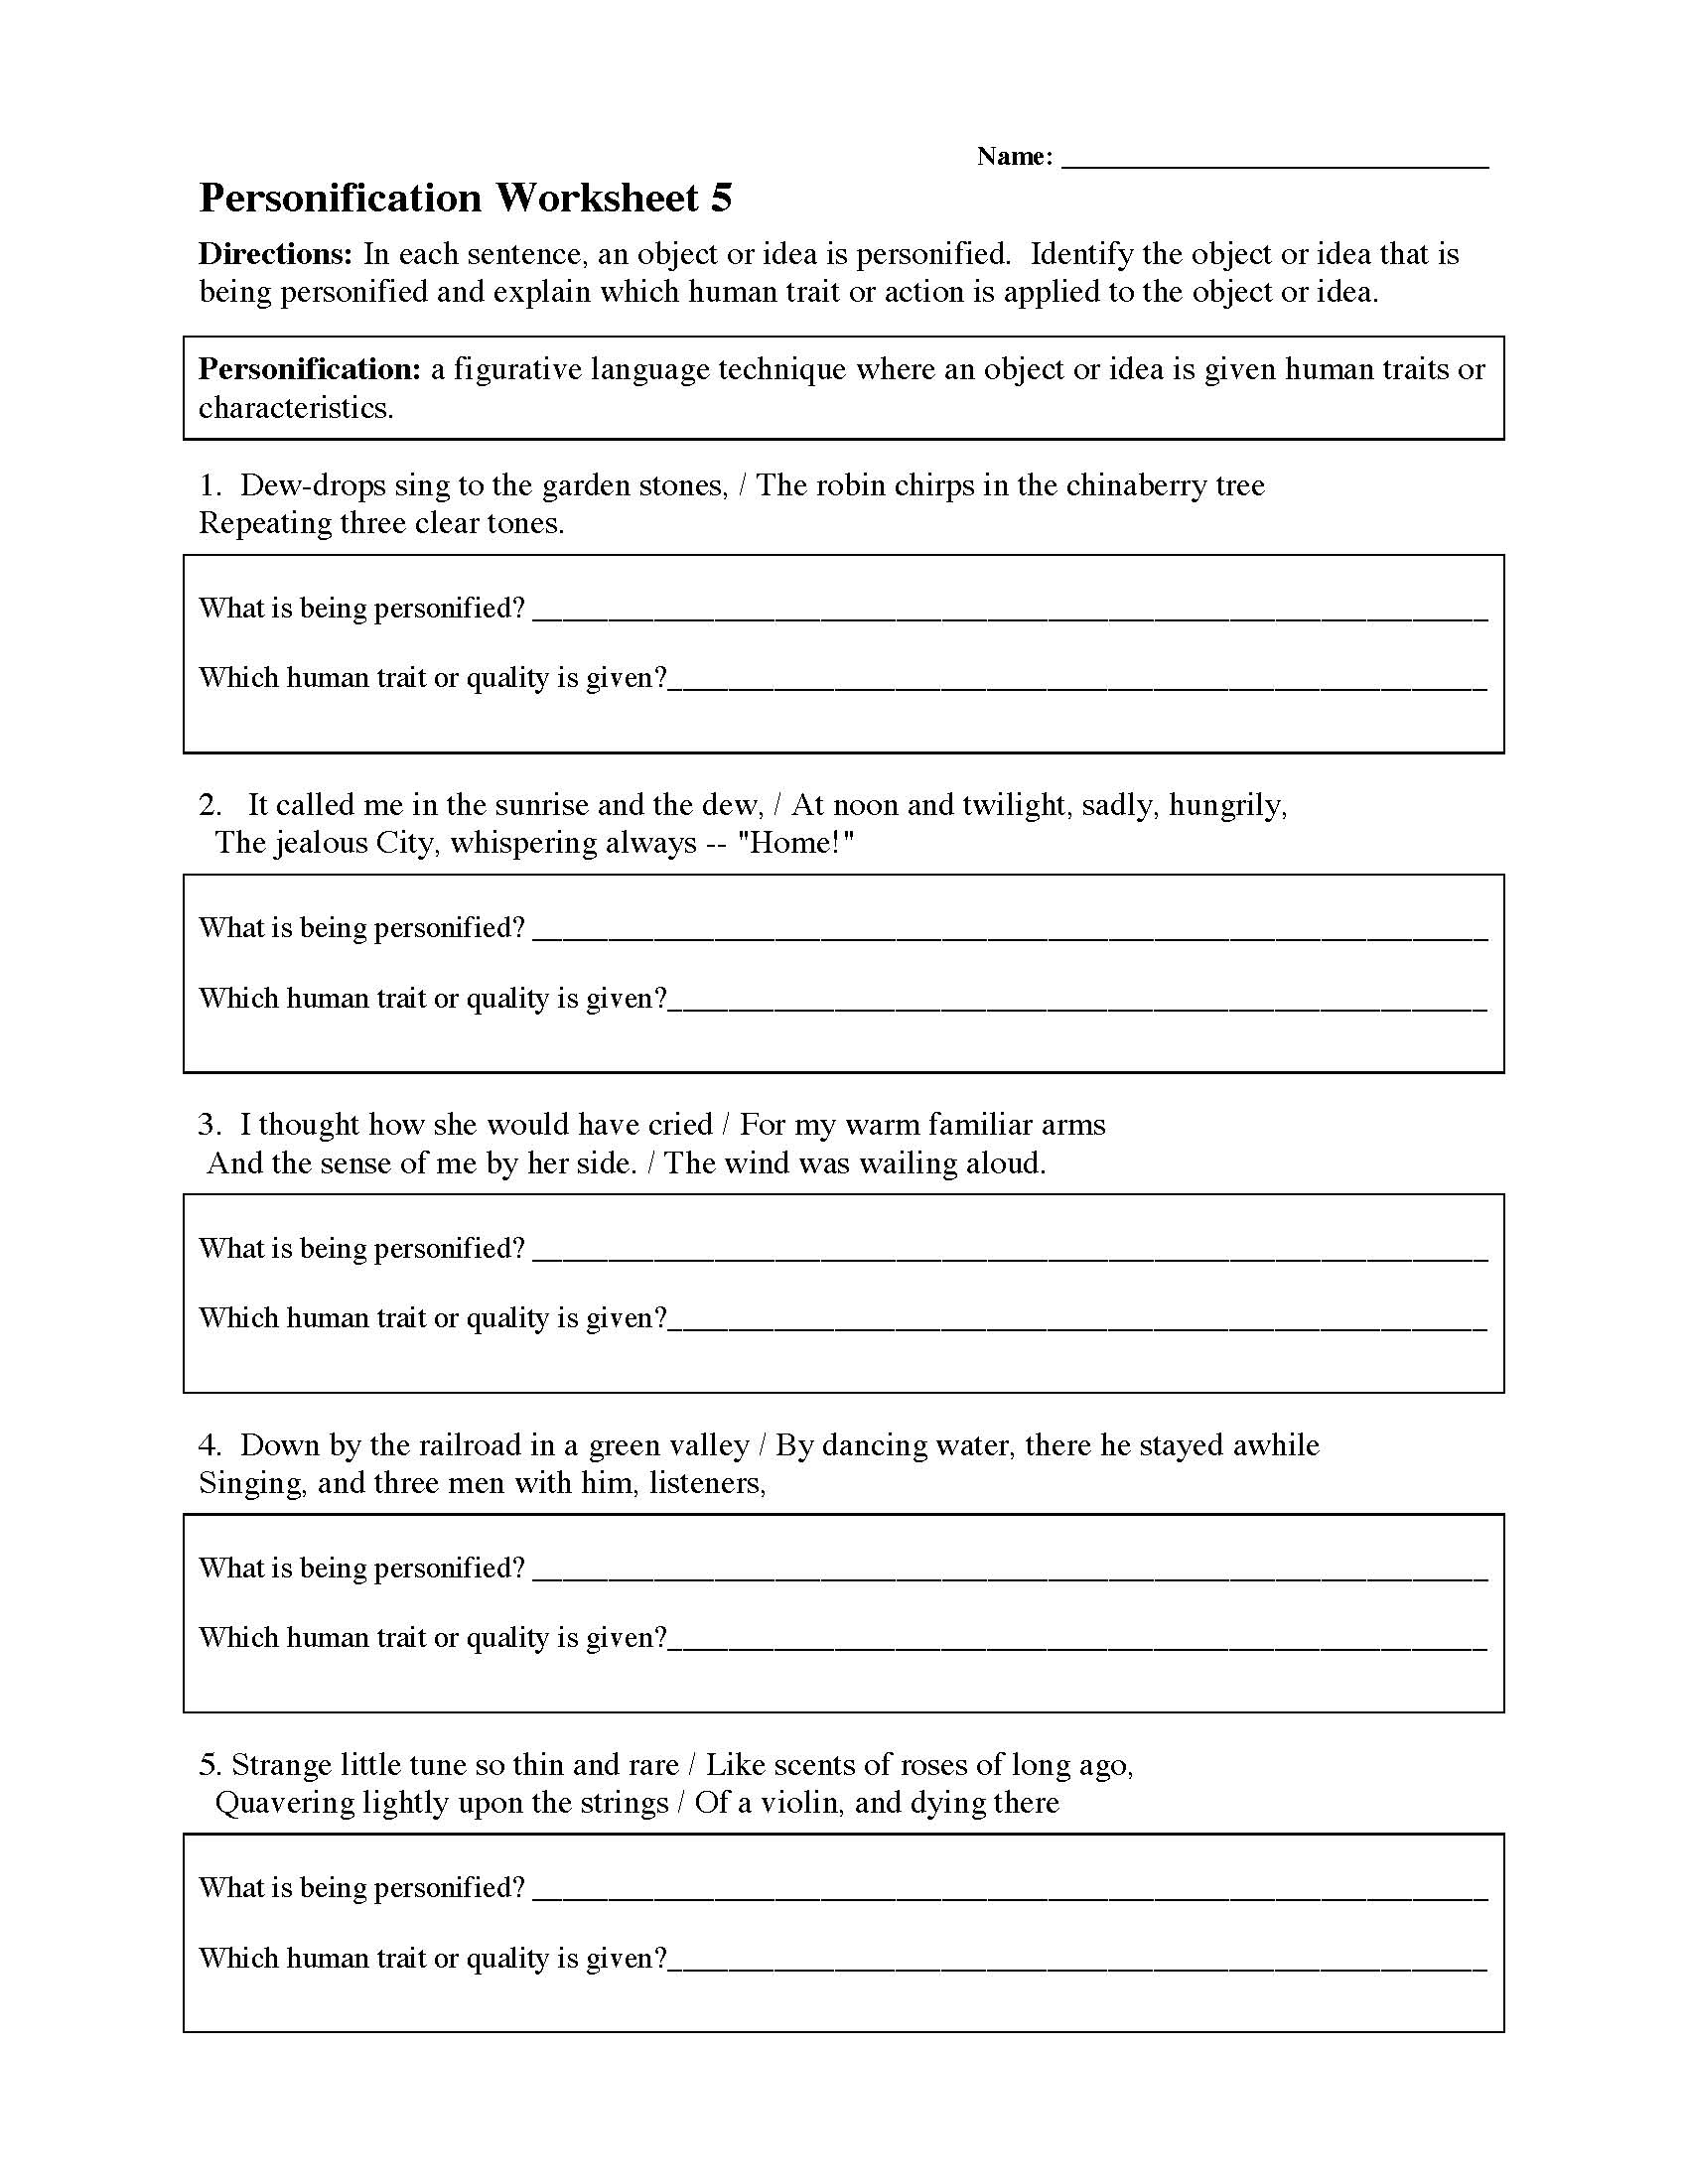 This is a preview image of Personification Worksheet 5. Click on it to enlarge it or view the source file.